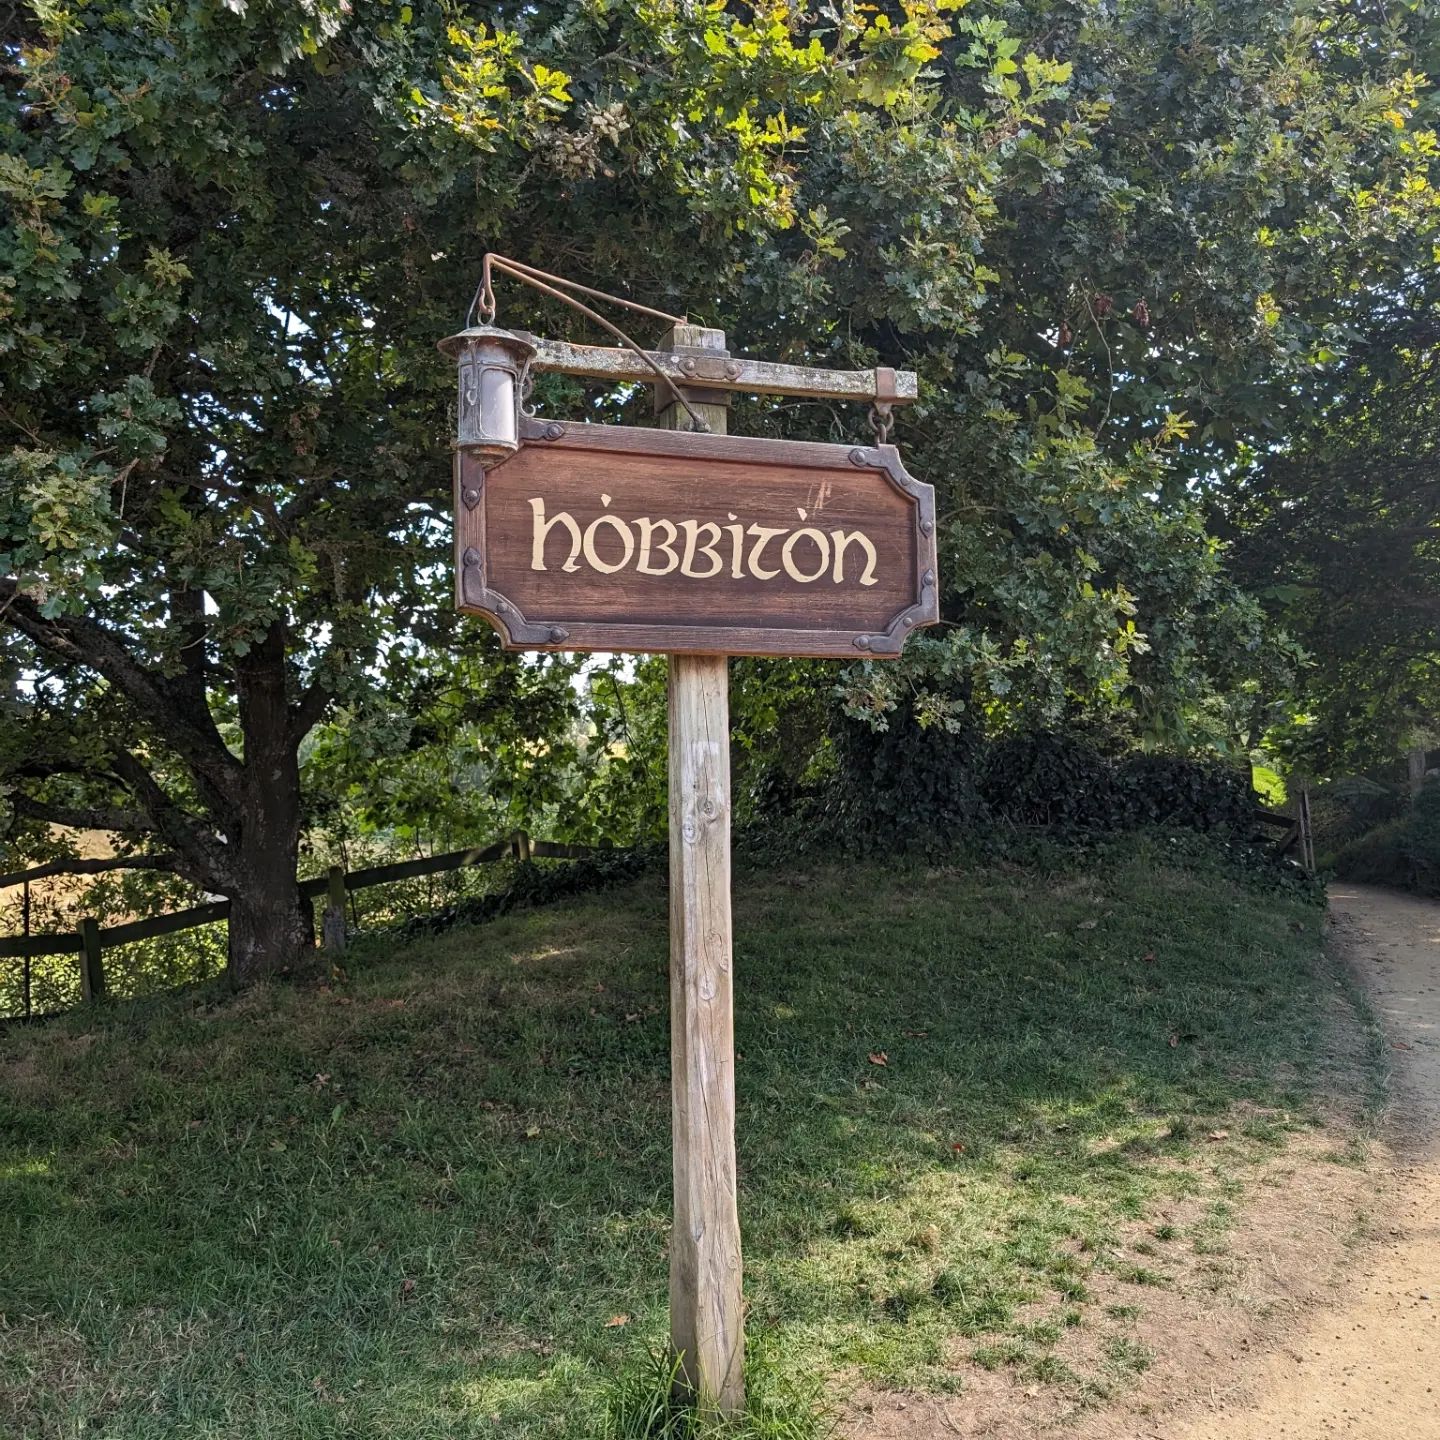 Do you wish me a good morning, or mean that it is a good morning whether I want it or not, or that you feel good this morning, or that it is a morning to be good on? #hobbiton #theshire #newzealand